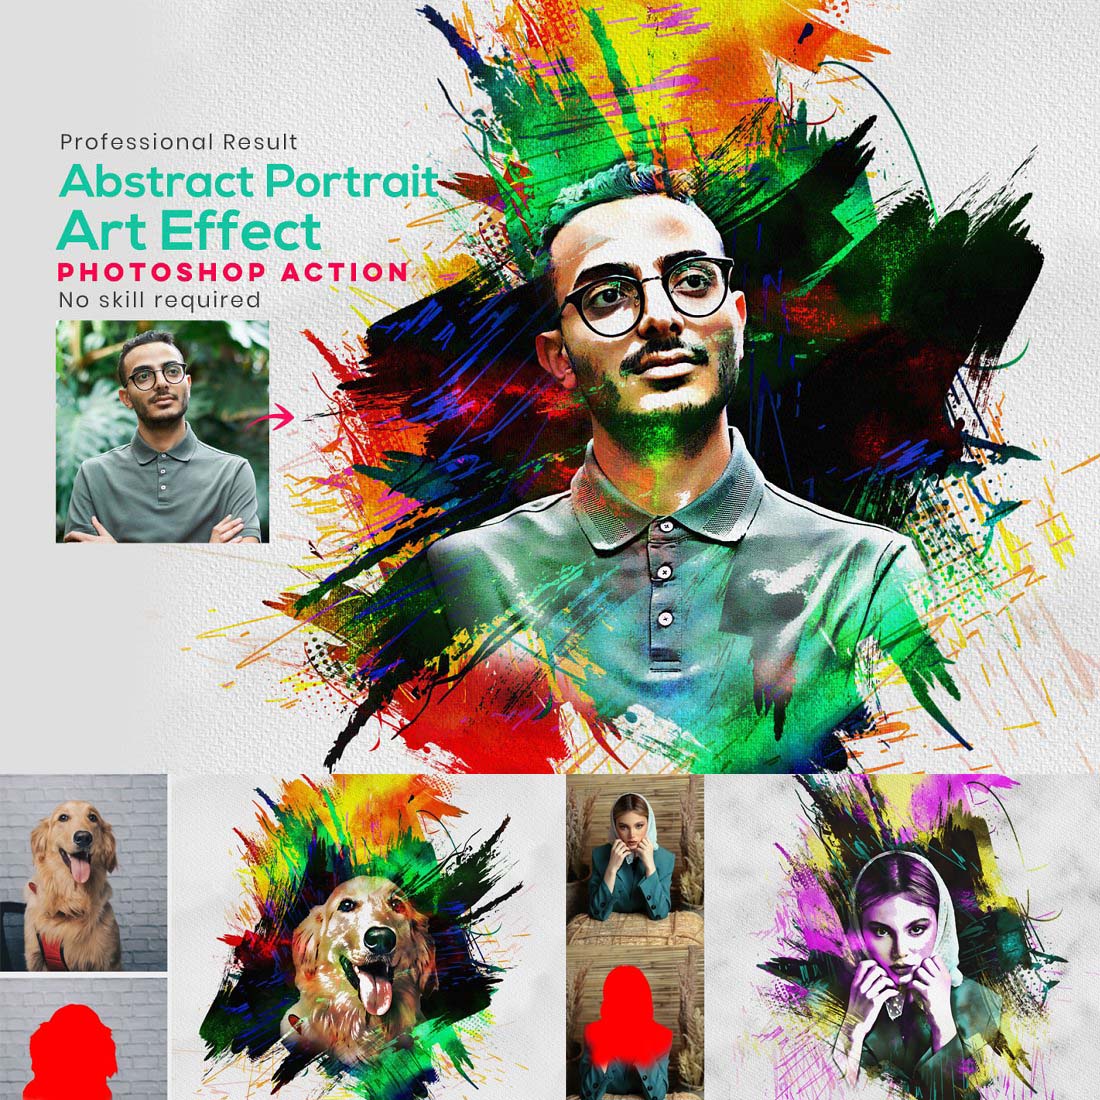 Abstract Portrait Art Photo Effect cover image.